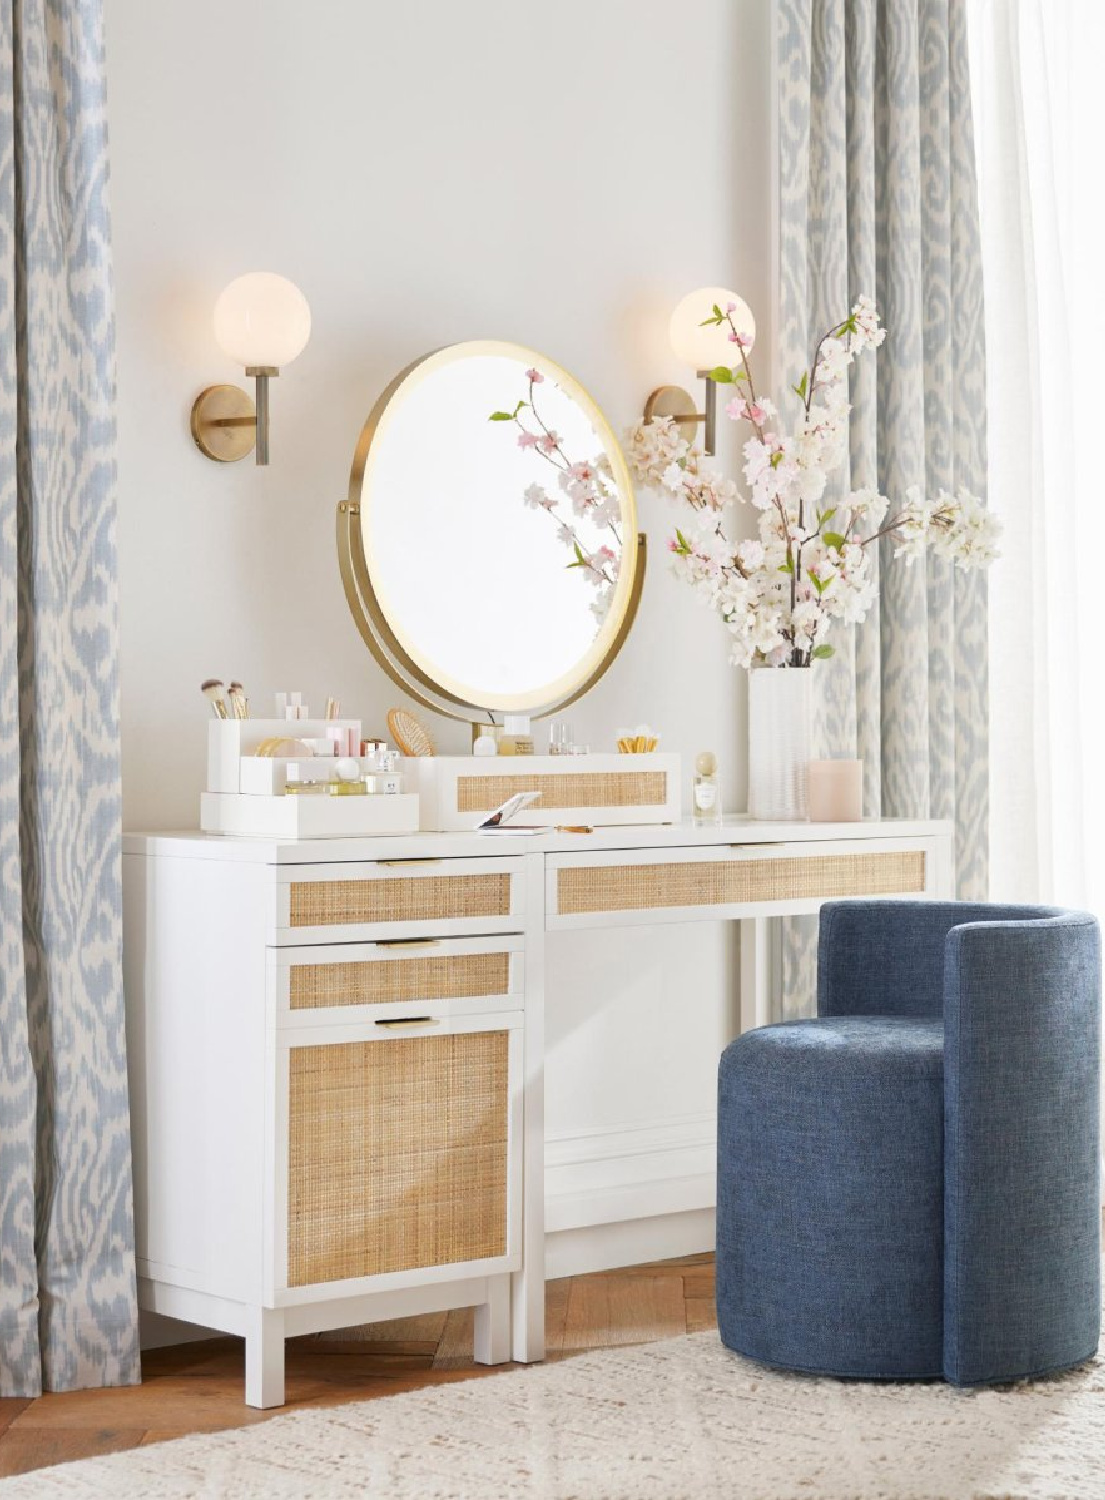 Makeup vanity with blue chair and blue patterned curtain panels, Pottery Barn.